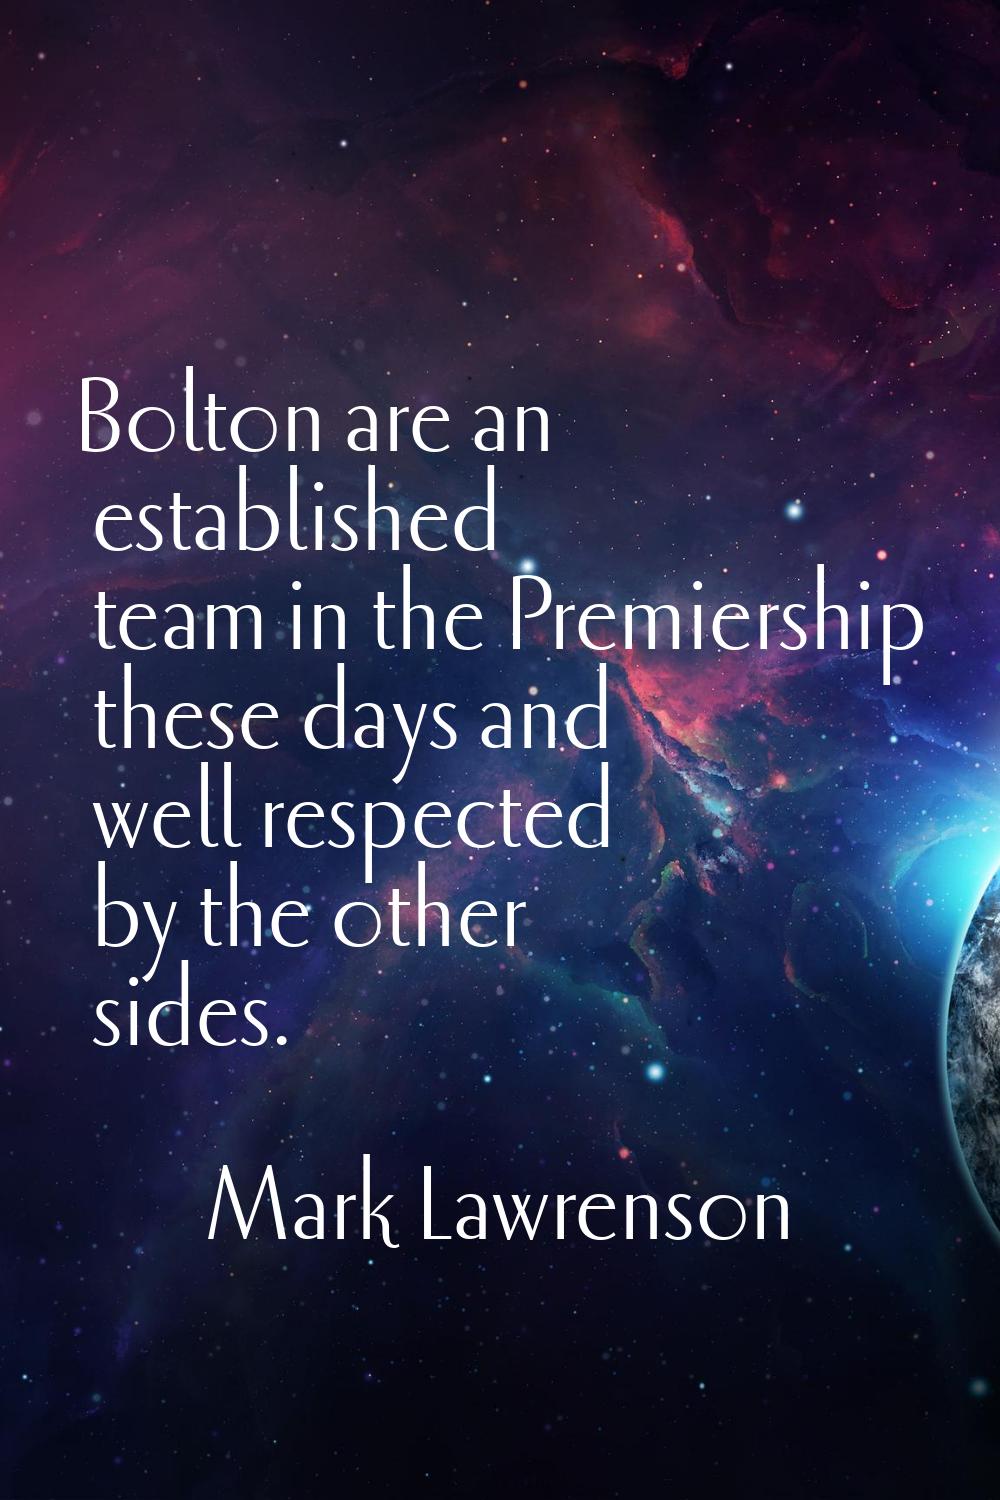 Bolton are an established team in the Premiership these days and well respected by the other sides.